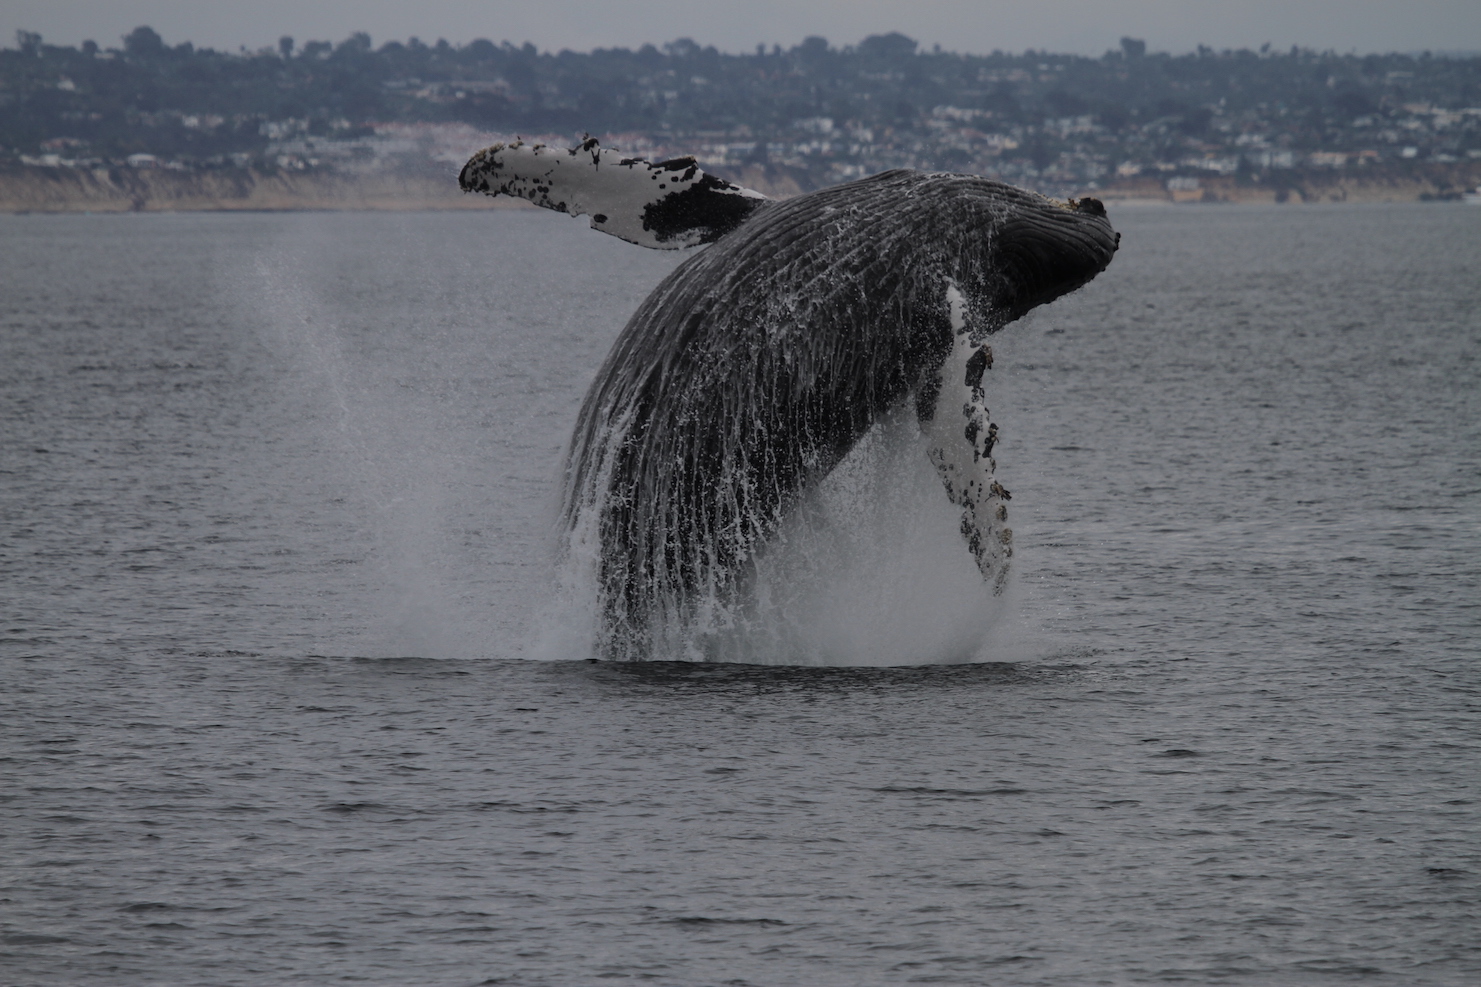 A big whale jumping out of the ocean